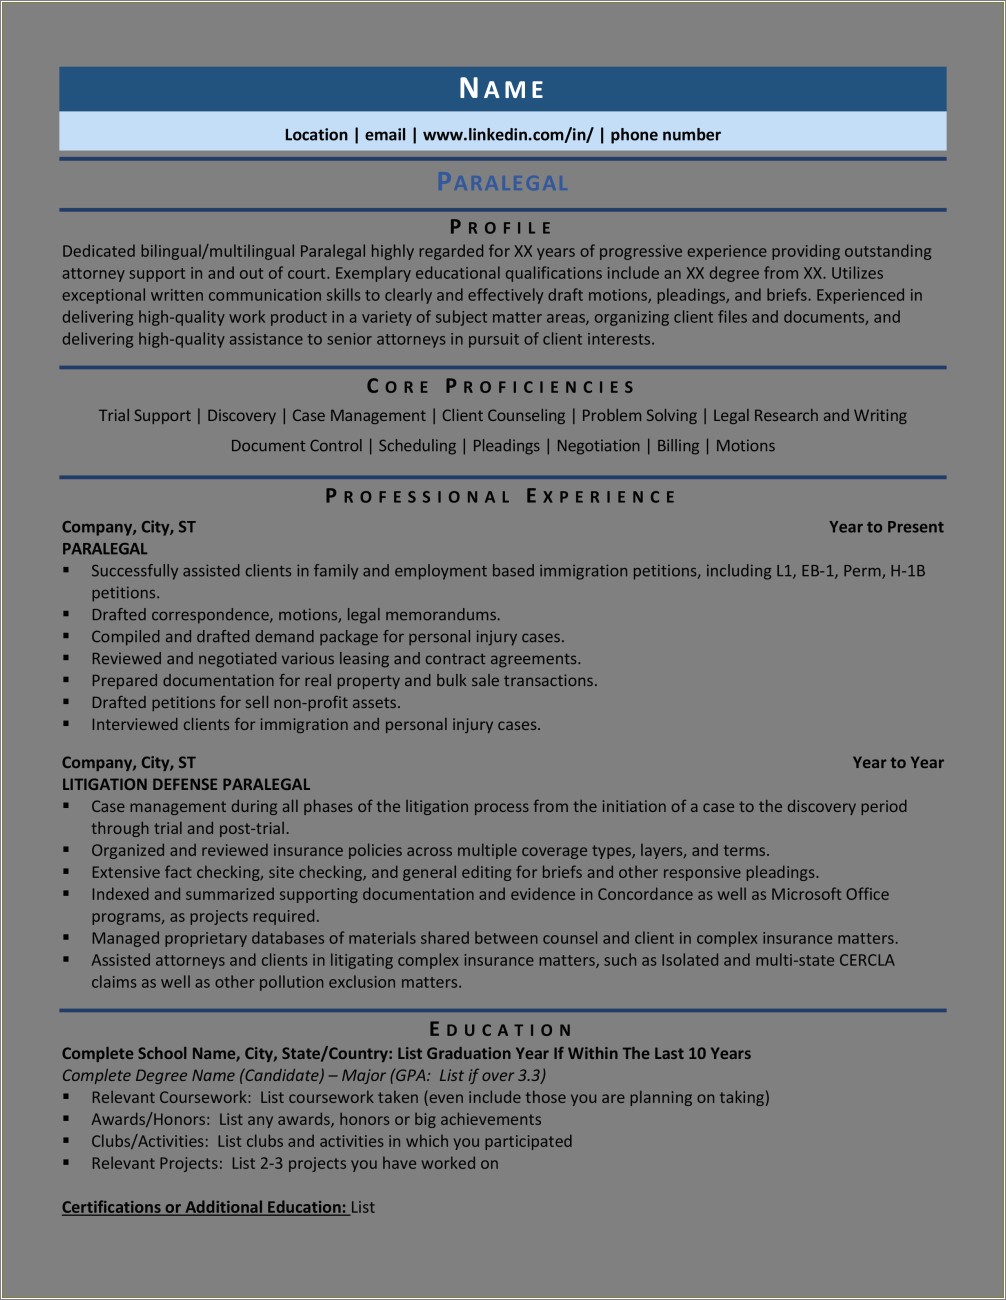 Sample Objective Statement For Paralegal Resume